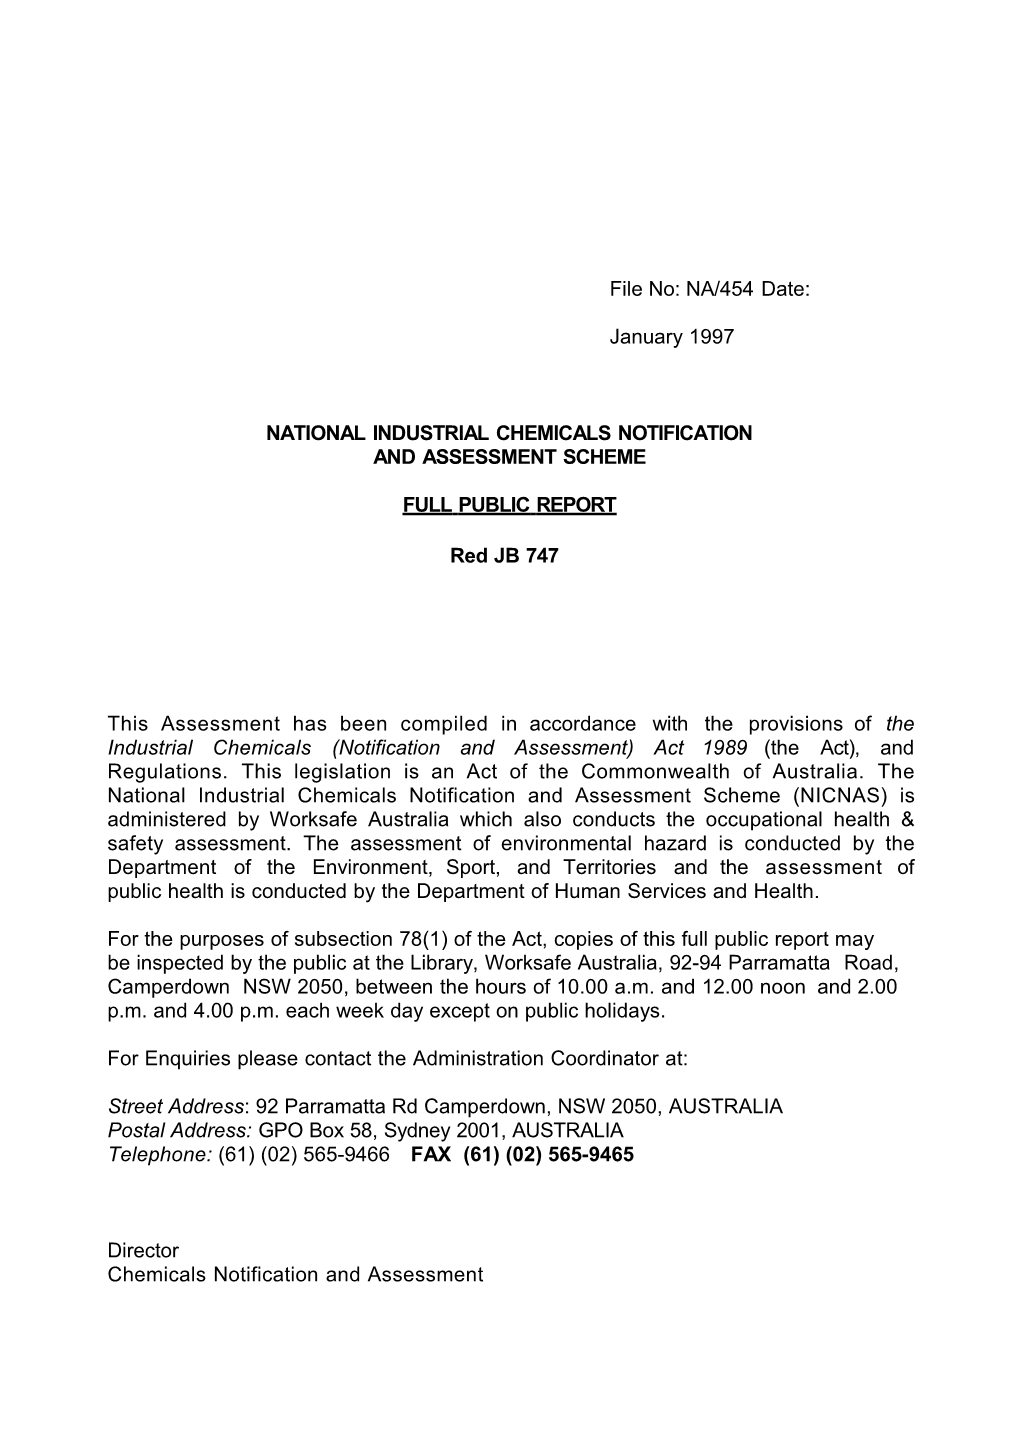 National Industrial Chemicals Notification and Assessment Scheme s13